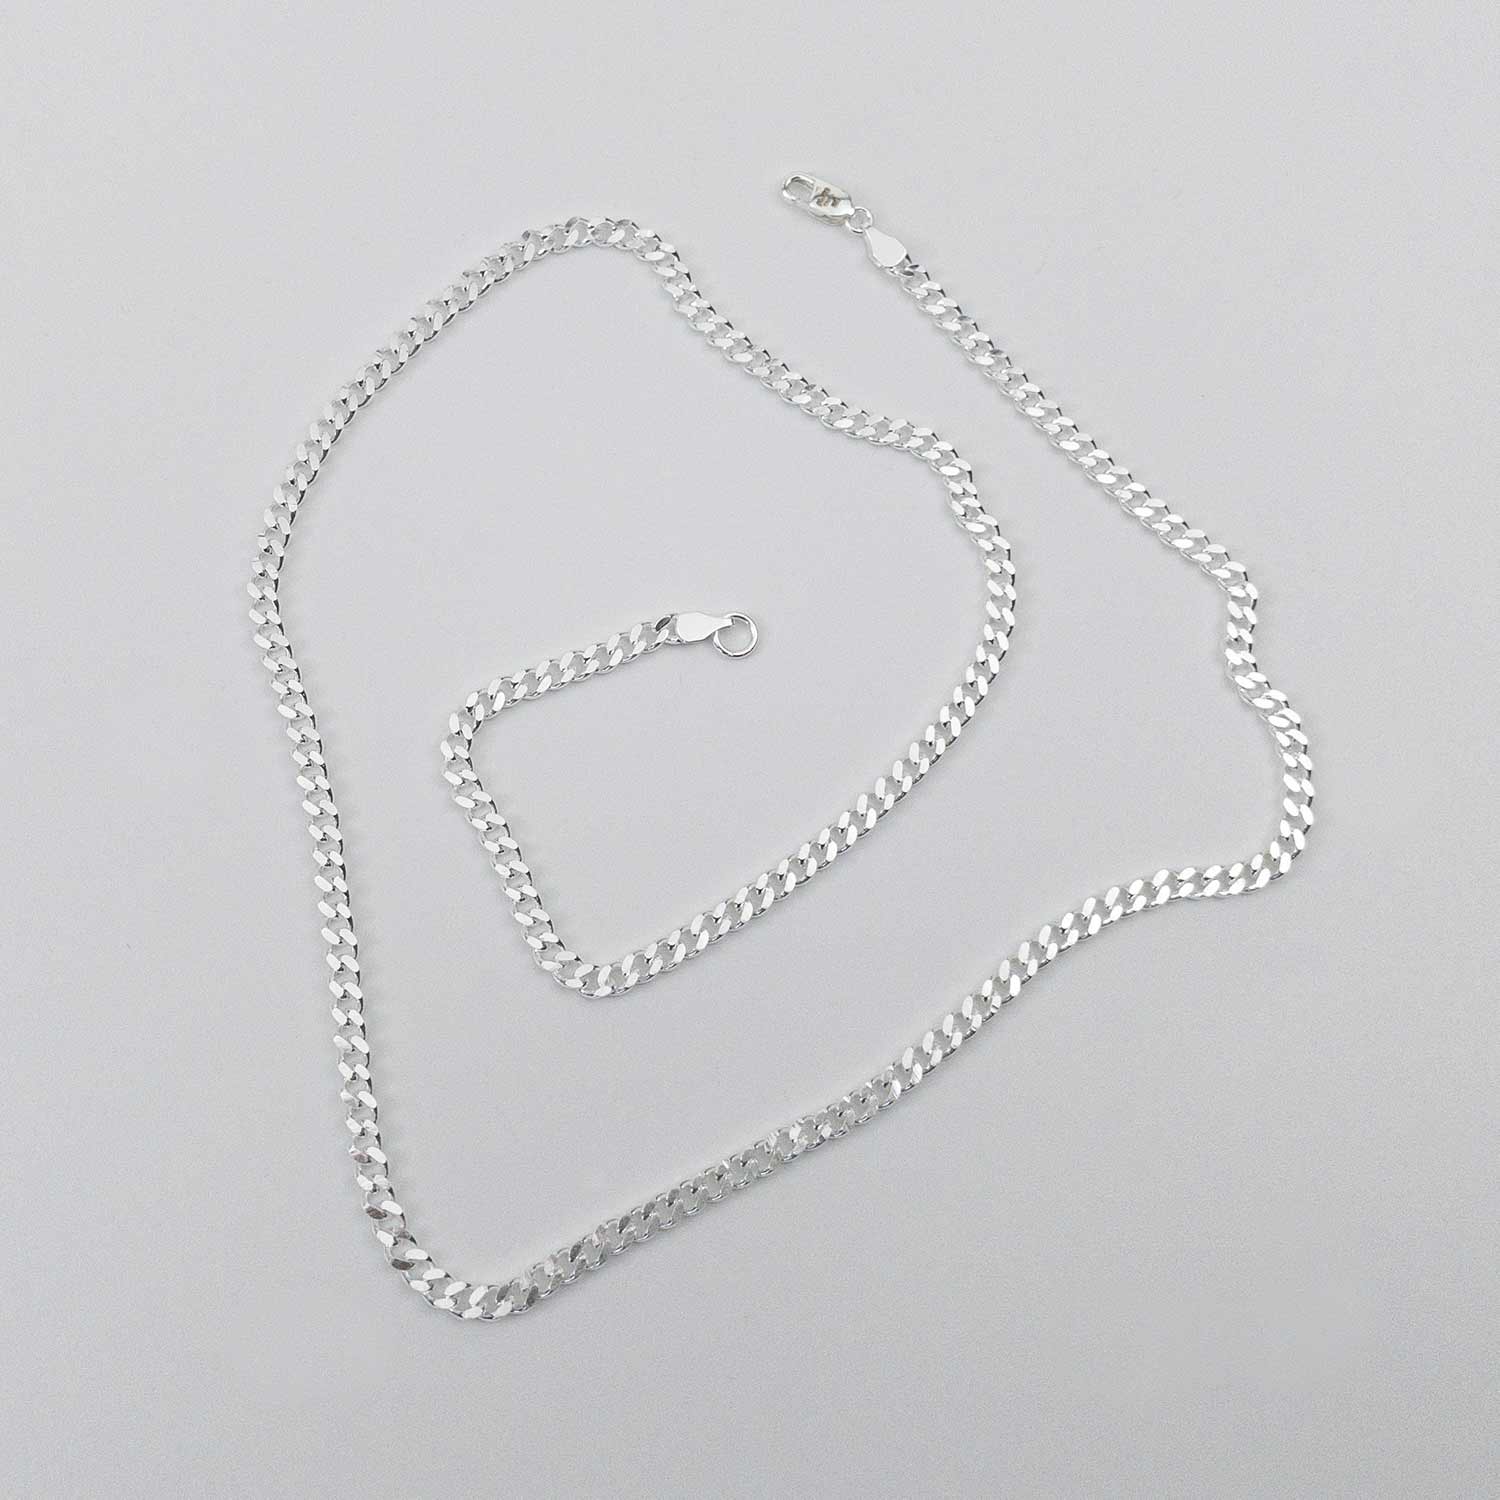 Sterling Silver 3mm Cuban Chain, unclasped in spiral, made by FEARS 925 - Personal Fears